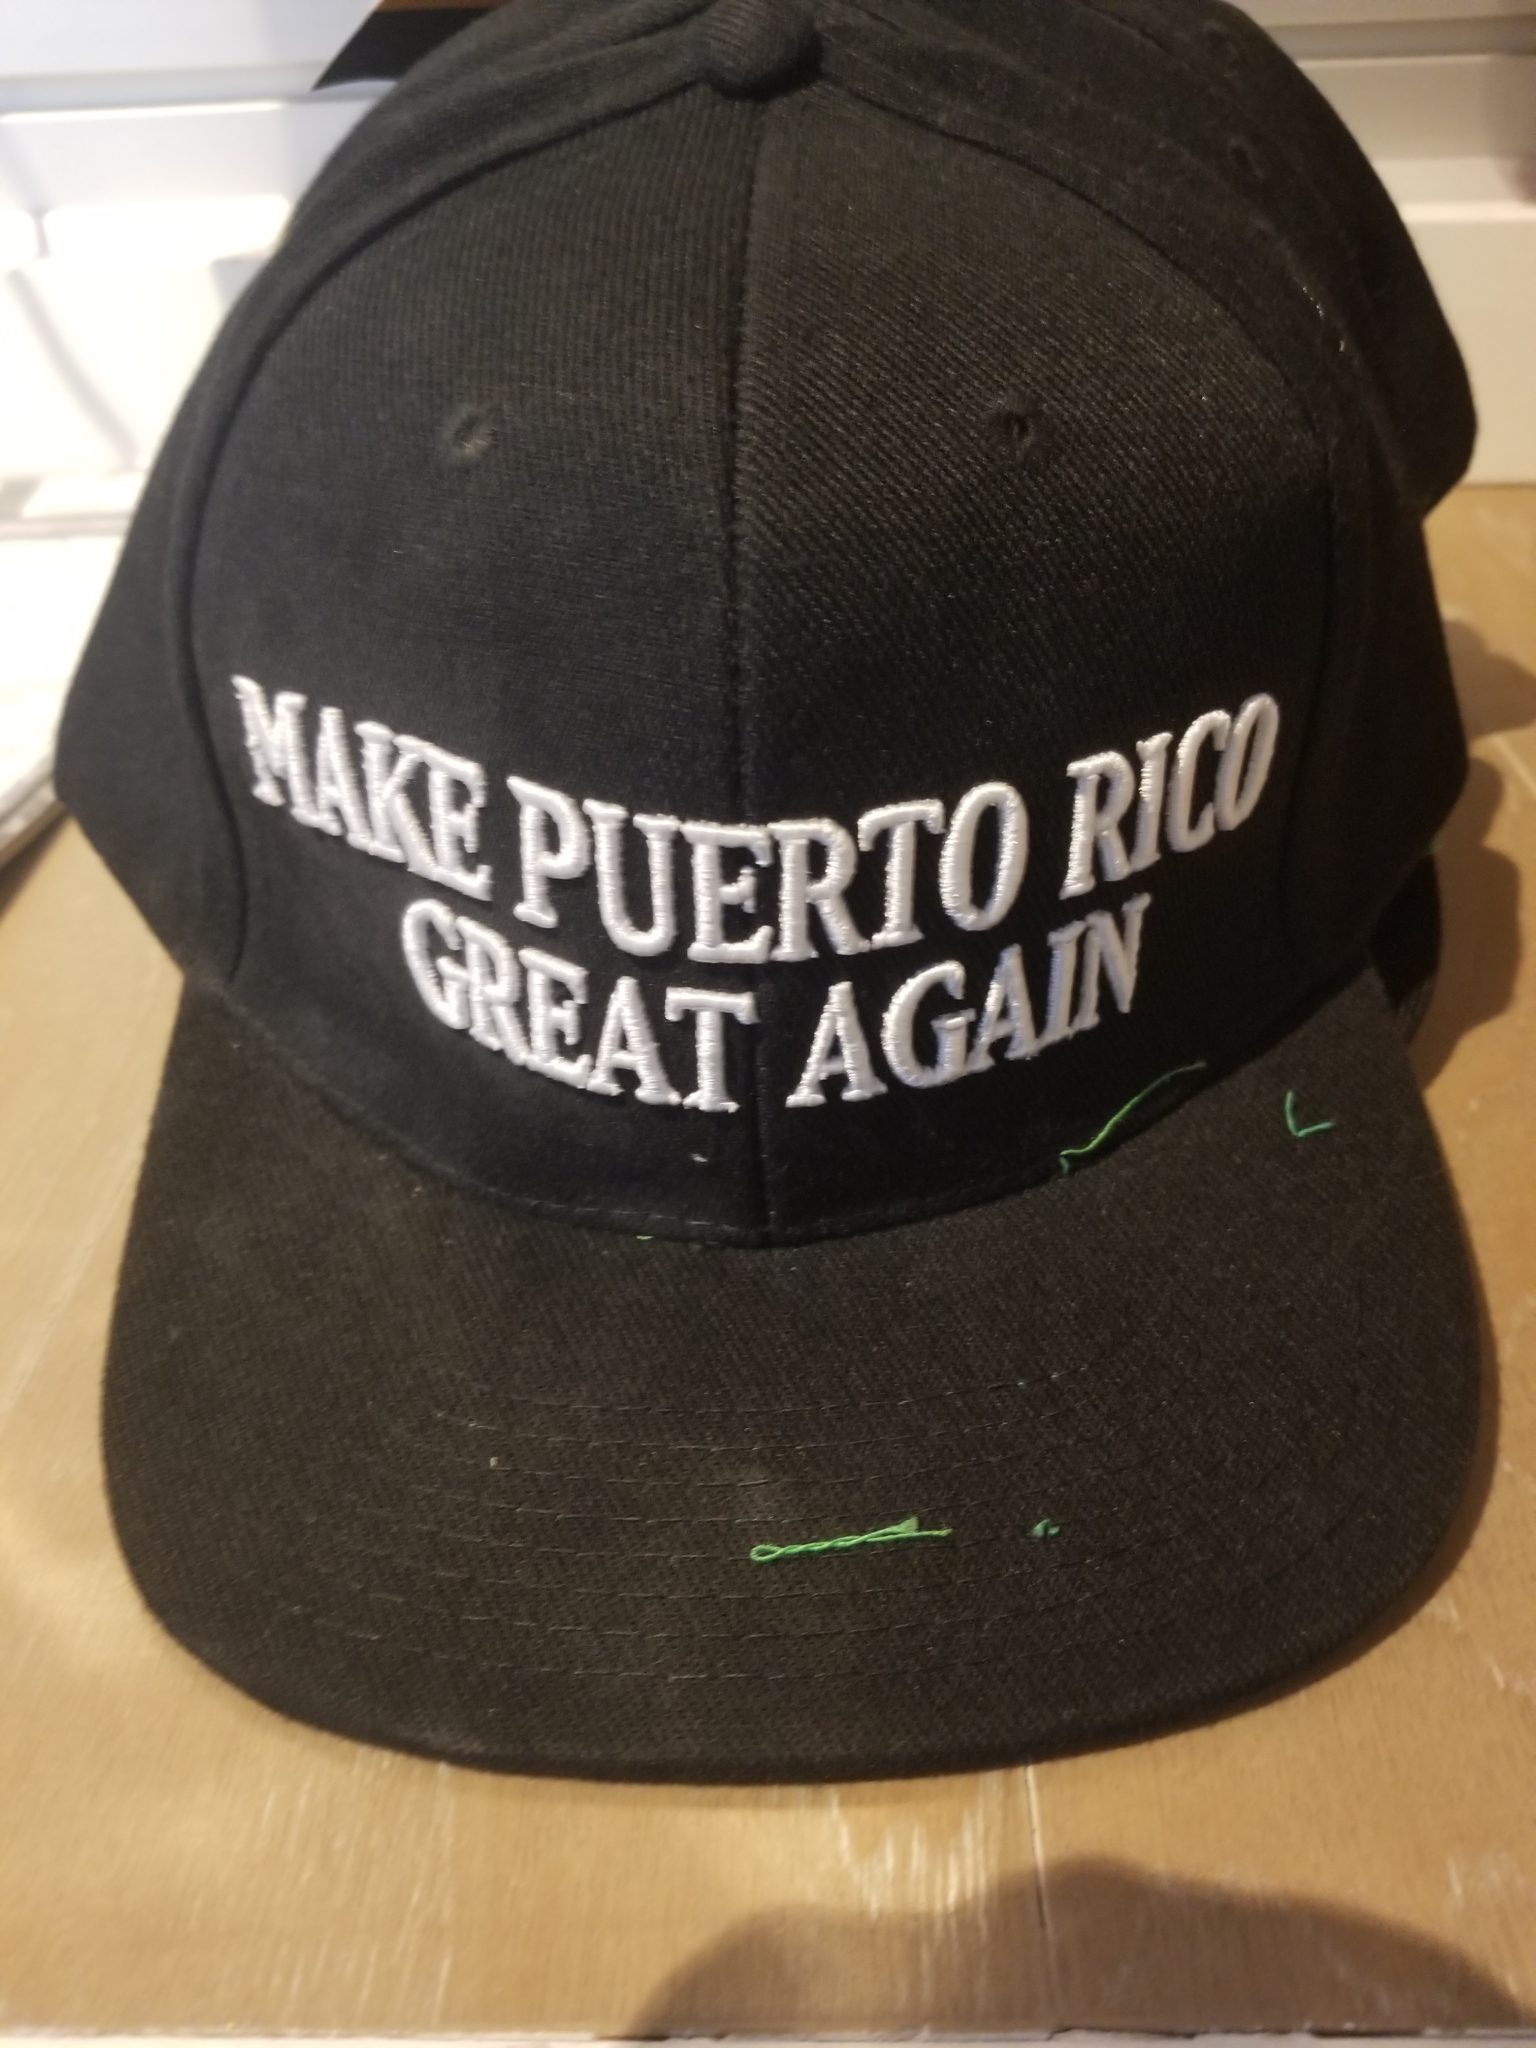 a black hat with white text on it